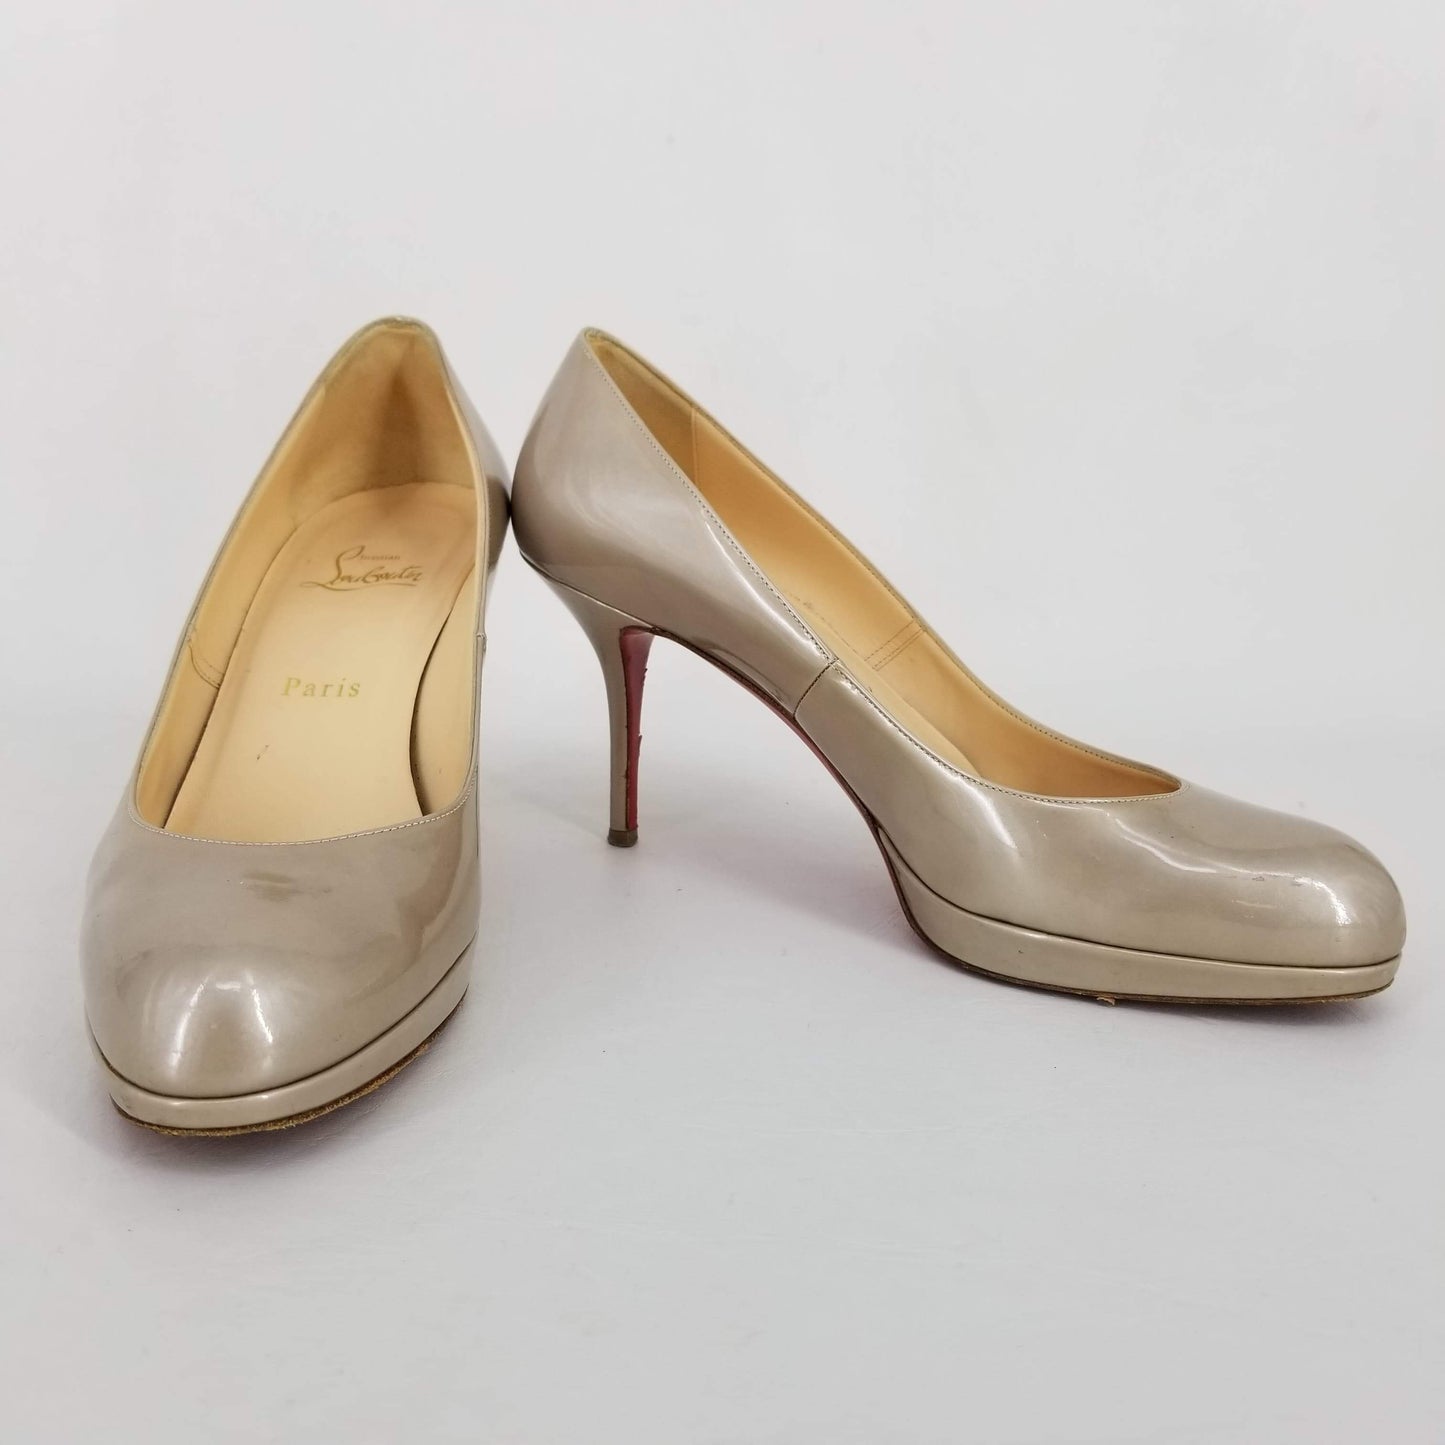 Authentic Christian Louboutin Pearl Grey Metallic Patent Simple 90 Women's Size 39 / 8.5